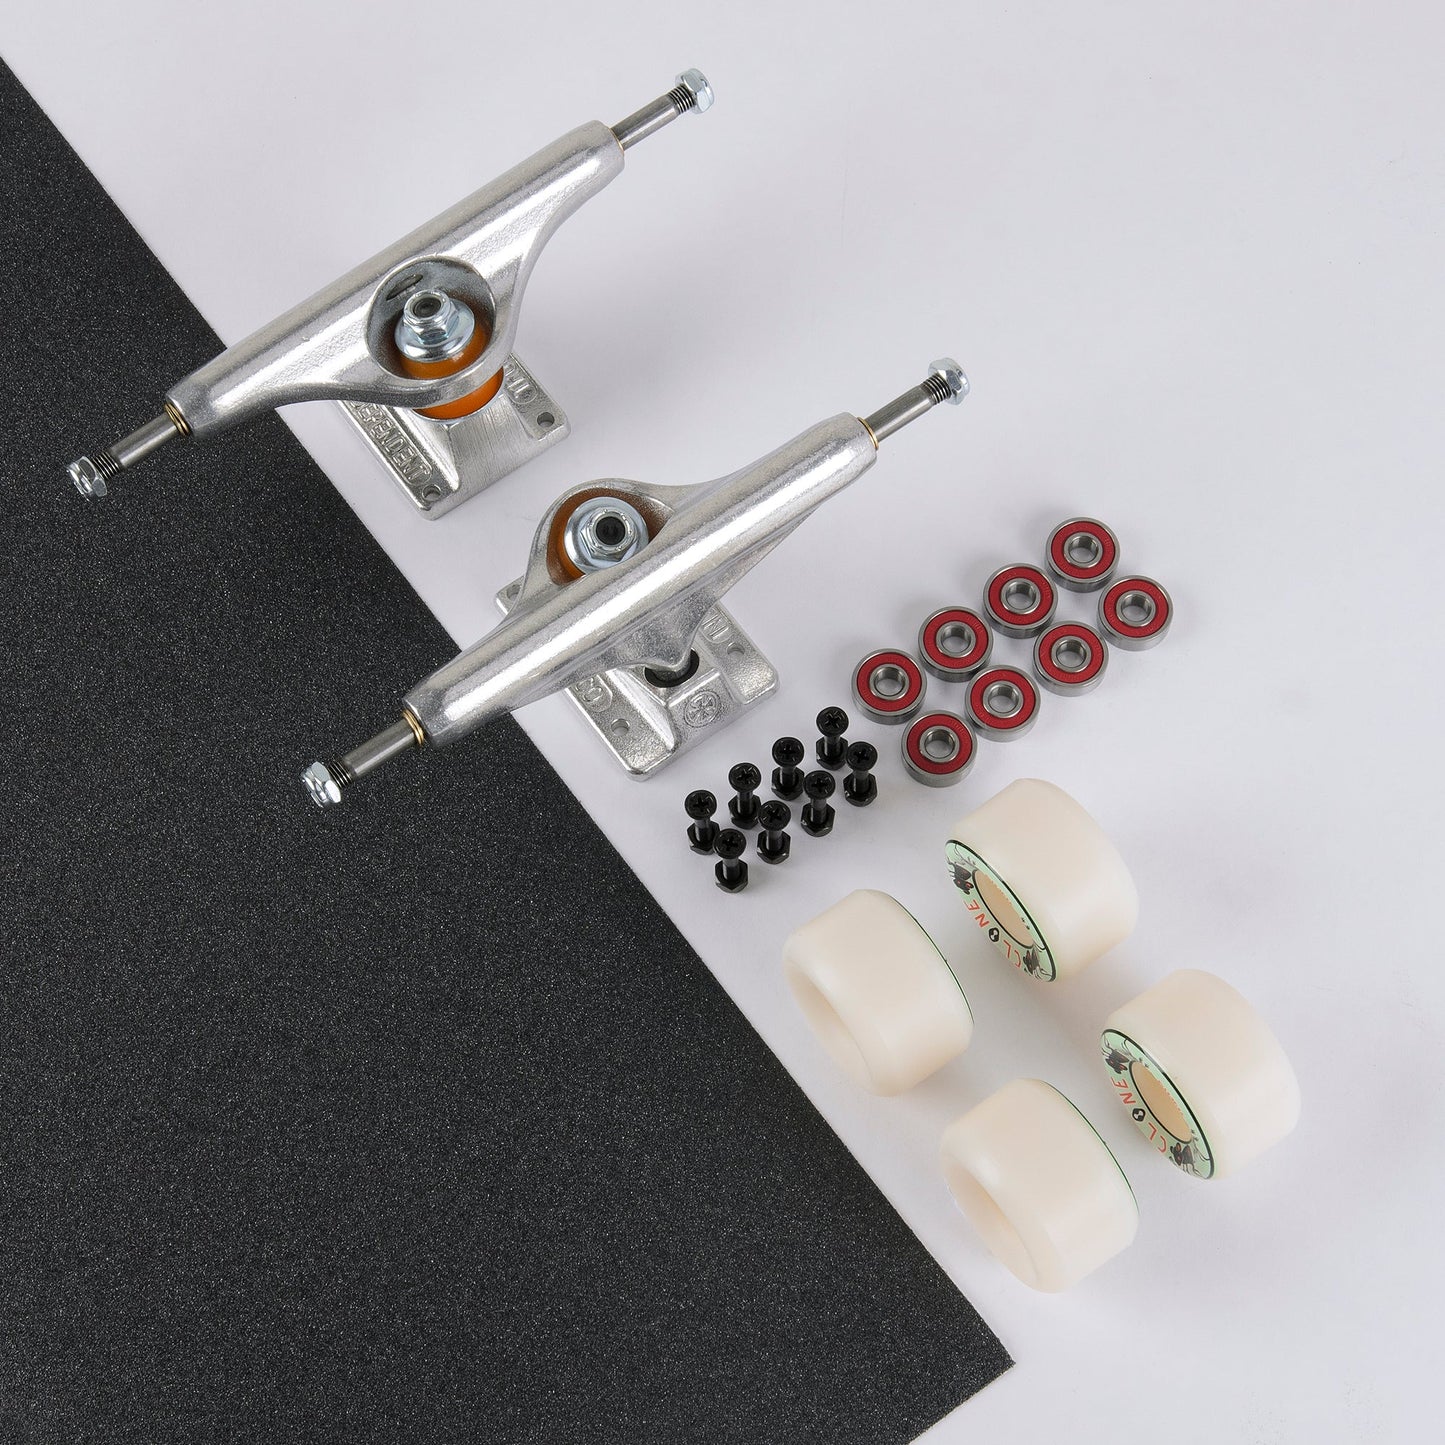 Build a Complete Skateboard (Component Package)